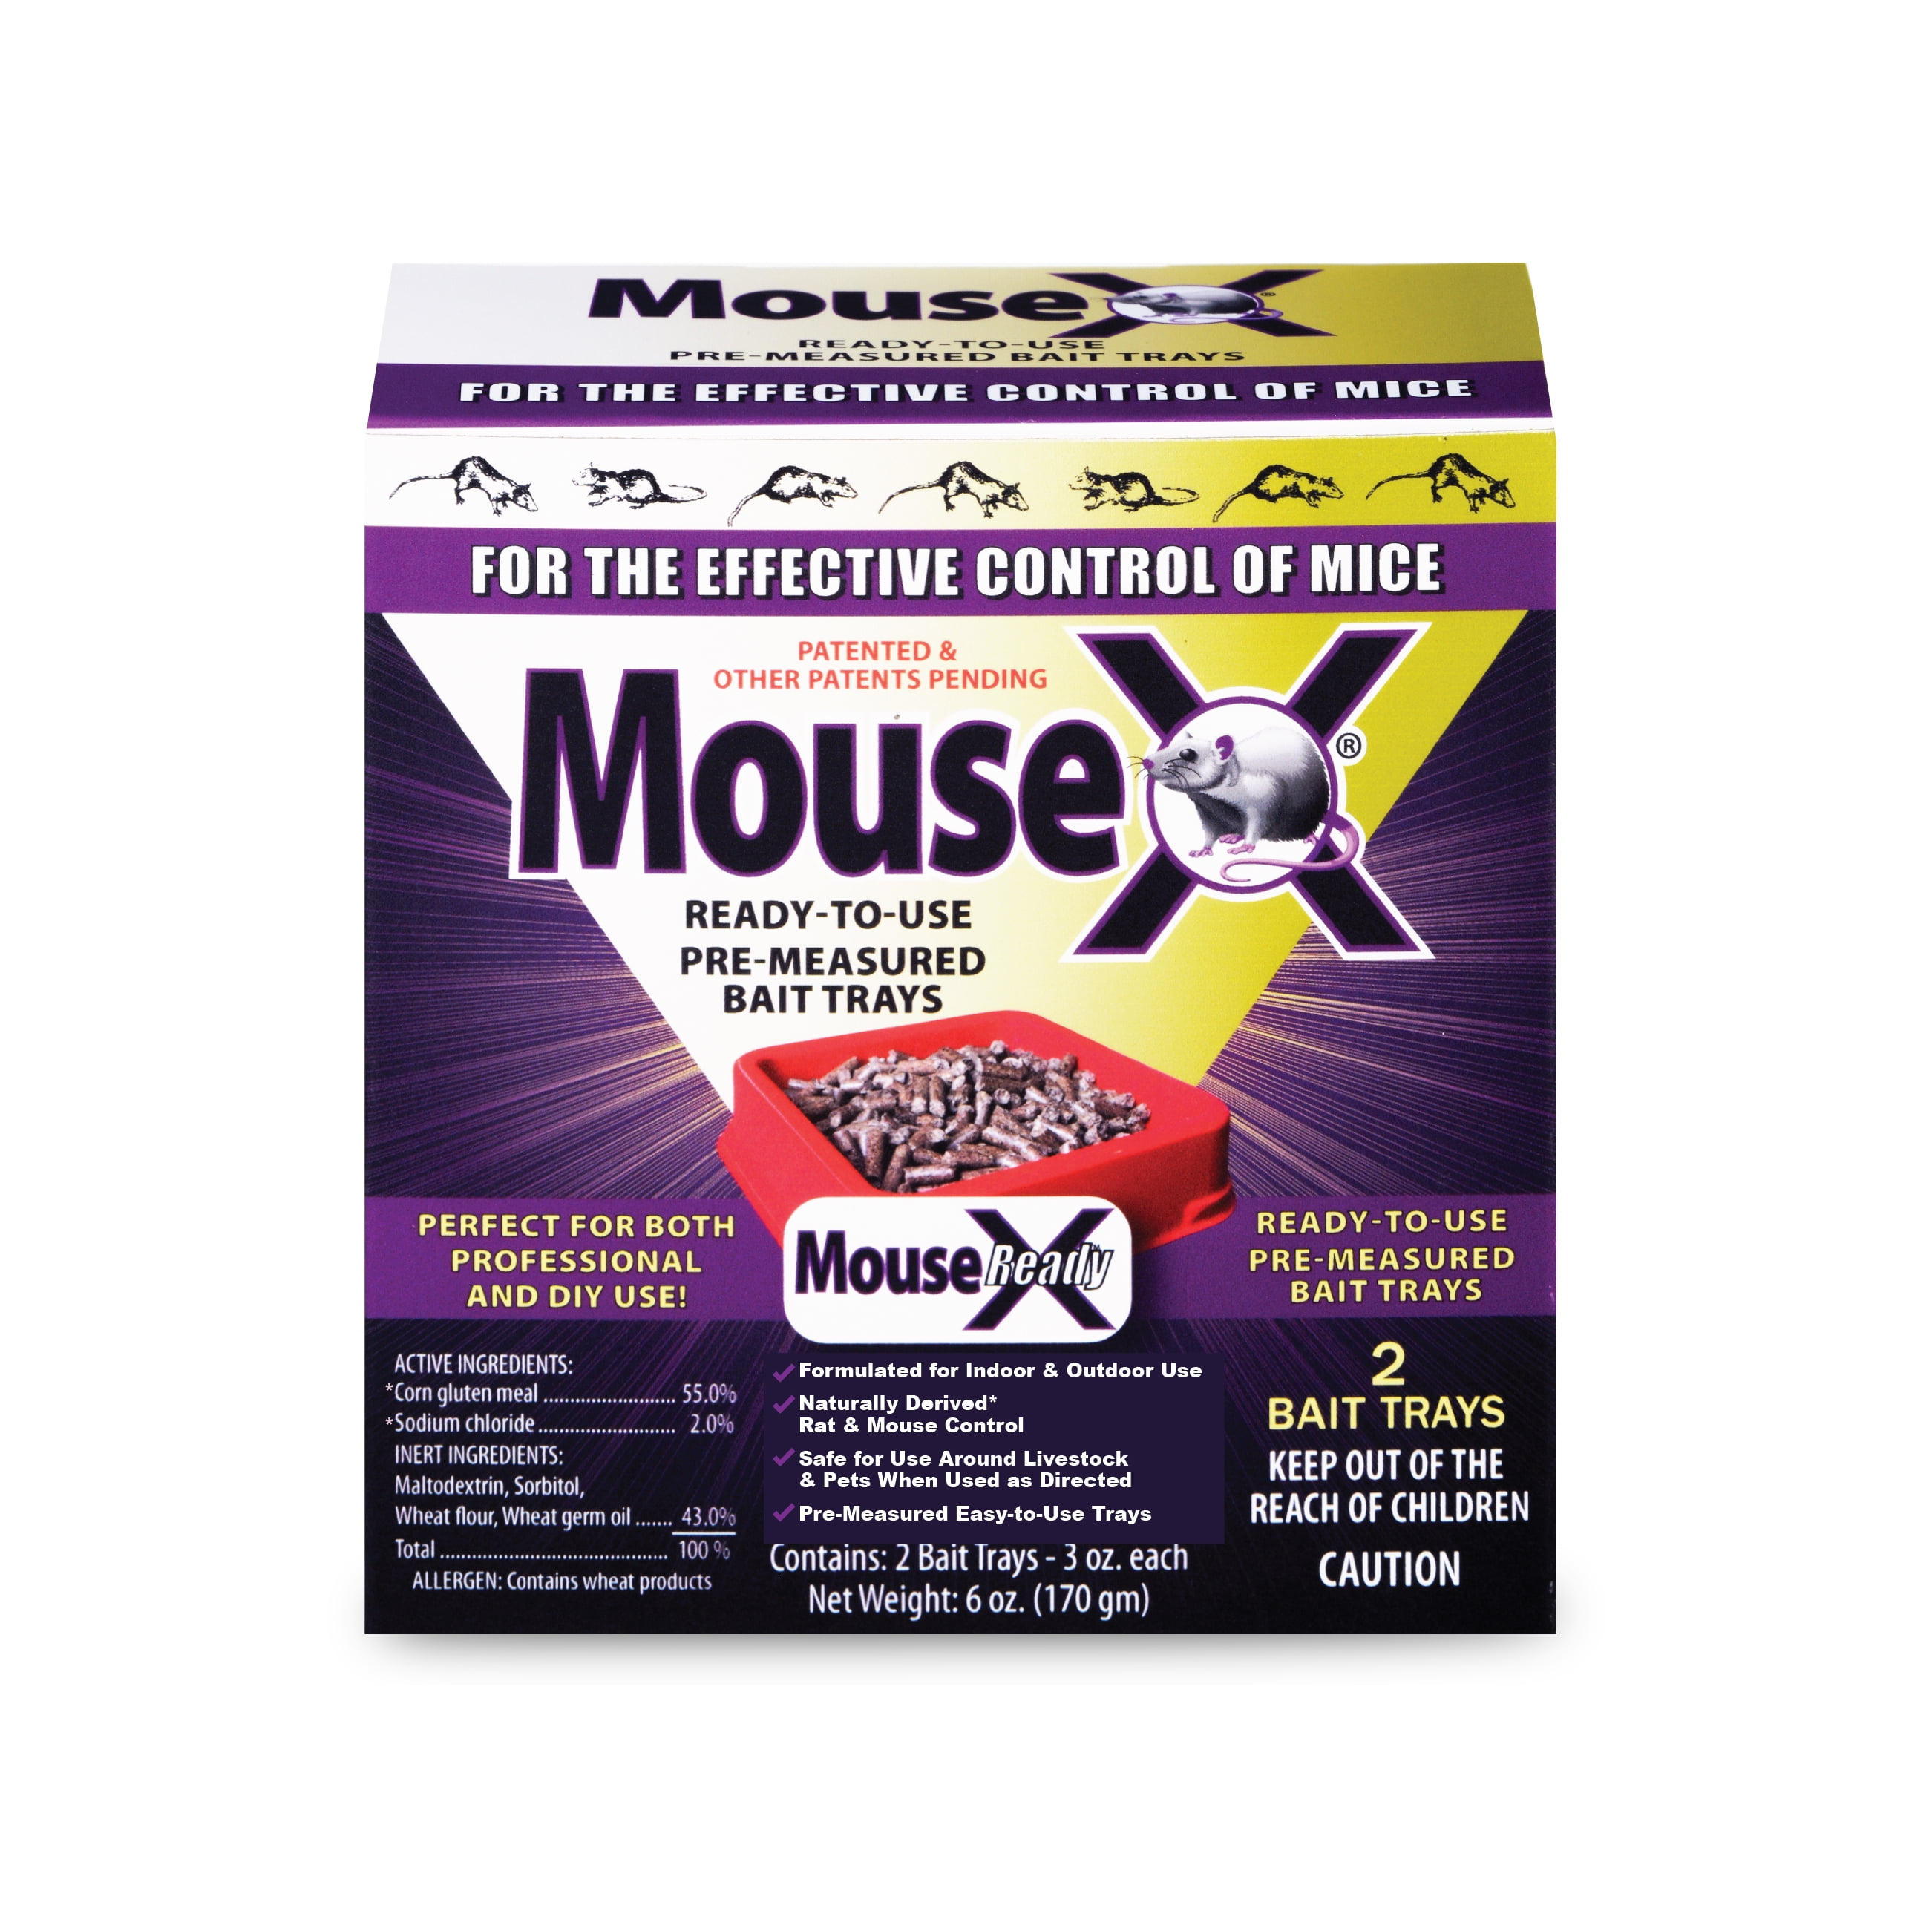 D-Con Disposable Mouse Bait Station (1-Pack) 1920089544, 1 - King Soopers